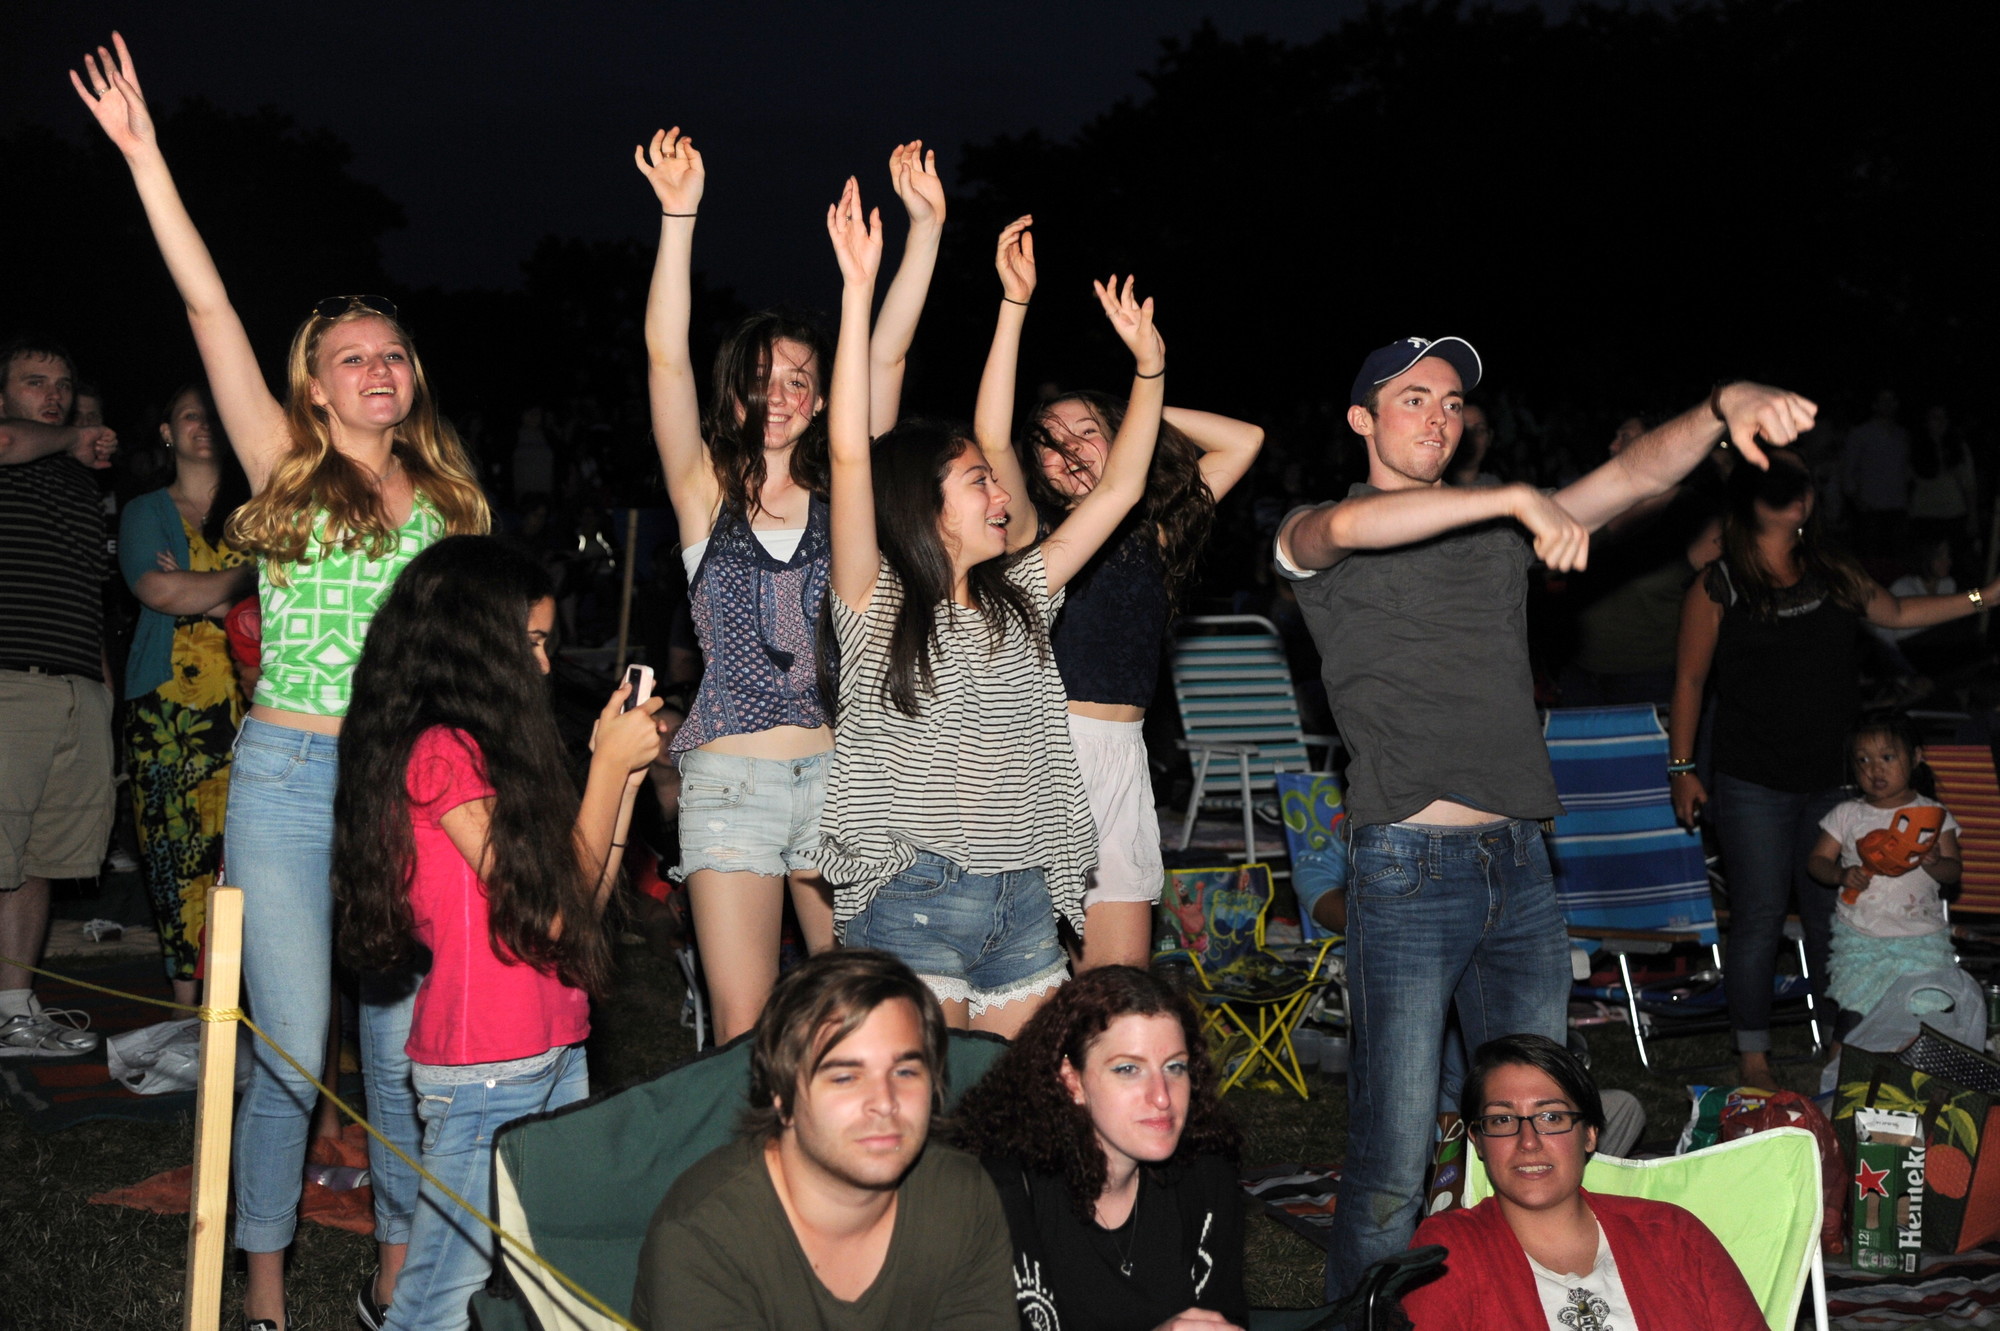 Fresh in the Park accommodates to a younger audience, like this group pictured above.